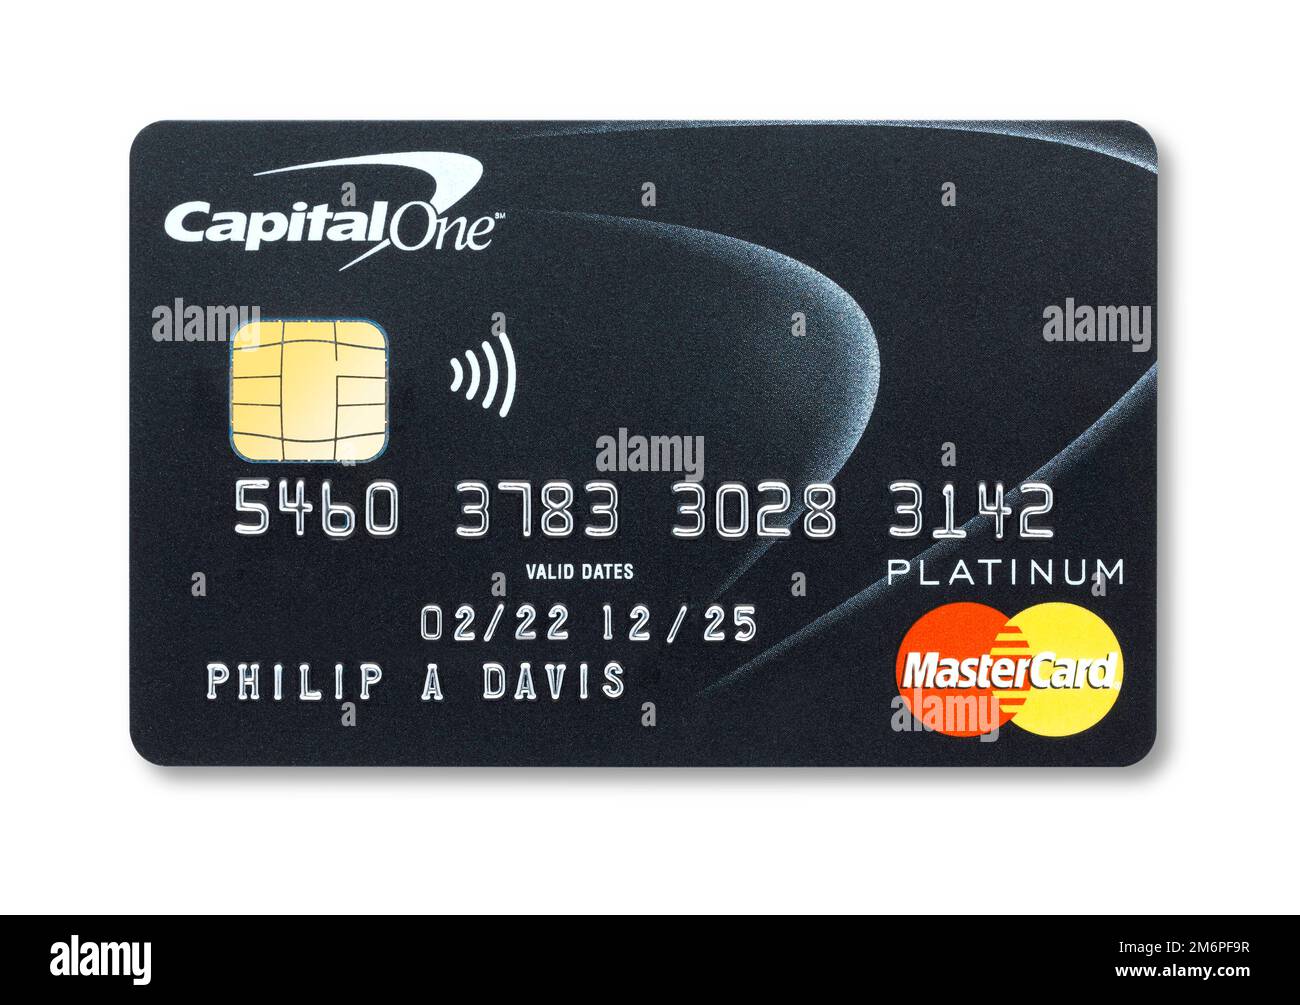 American Express Credit card Stock Photo